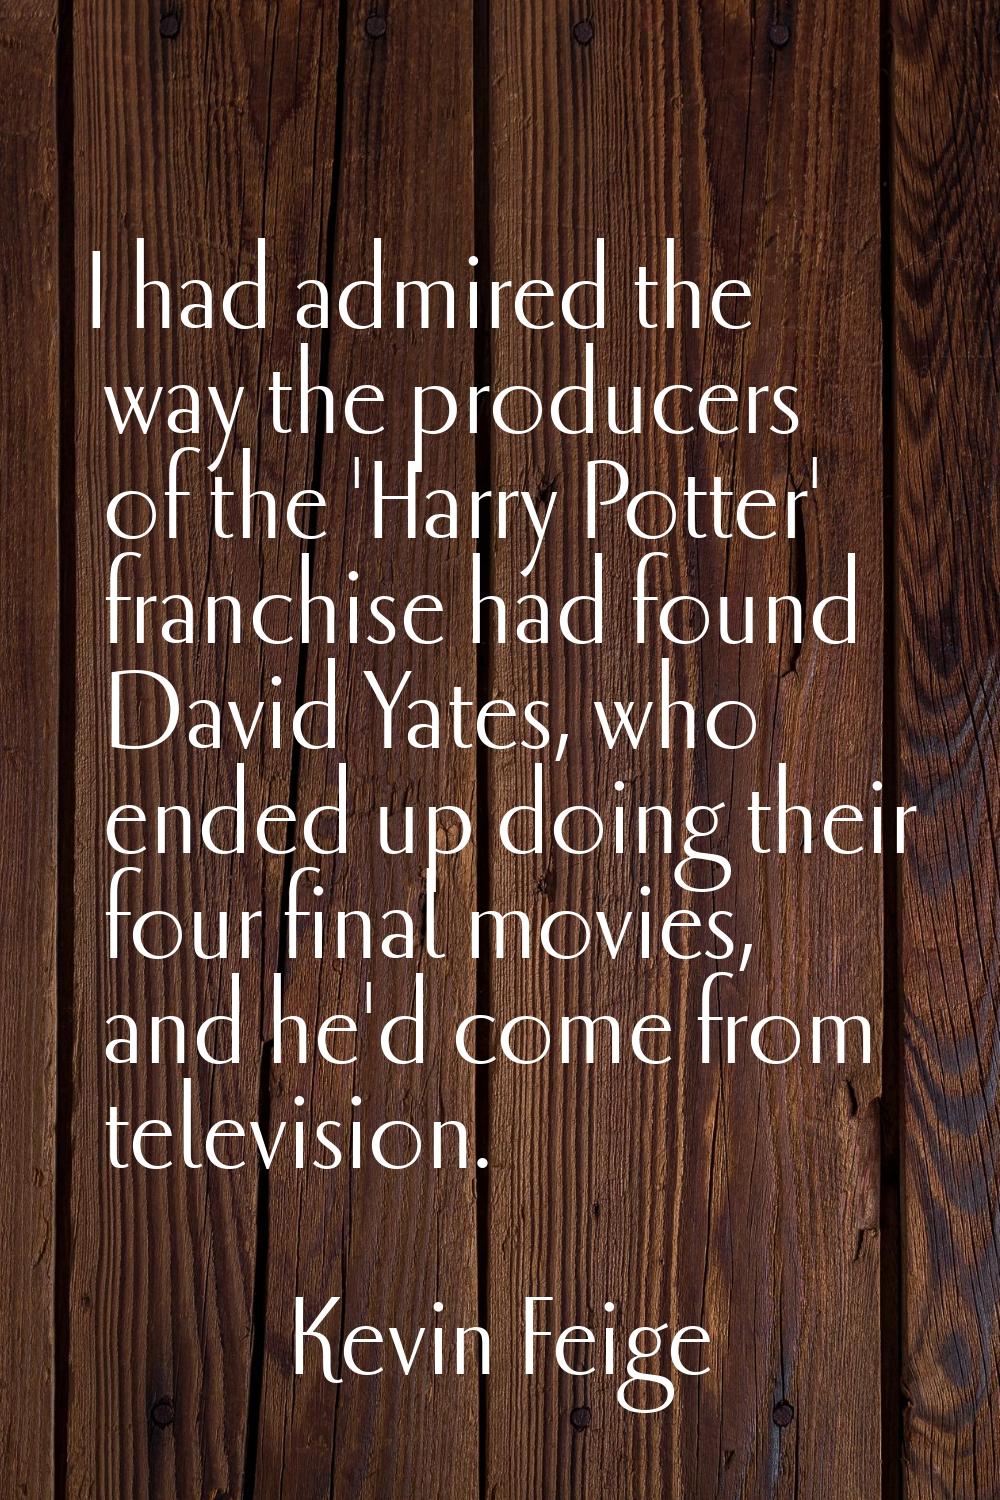 I had admired the way the producers of the 'Harry Potter' franchise had found David Yates, who ende